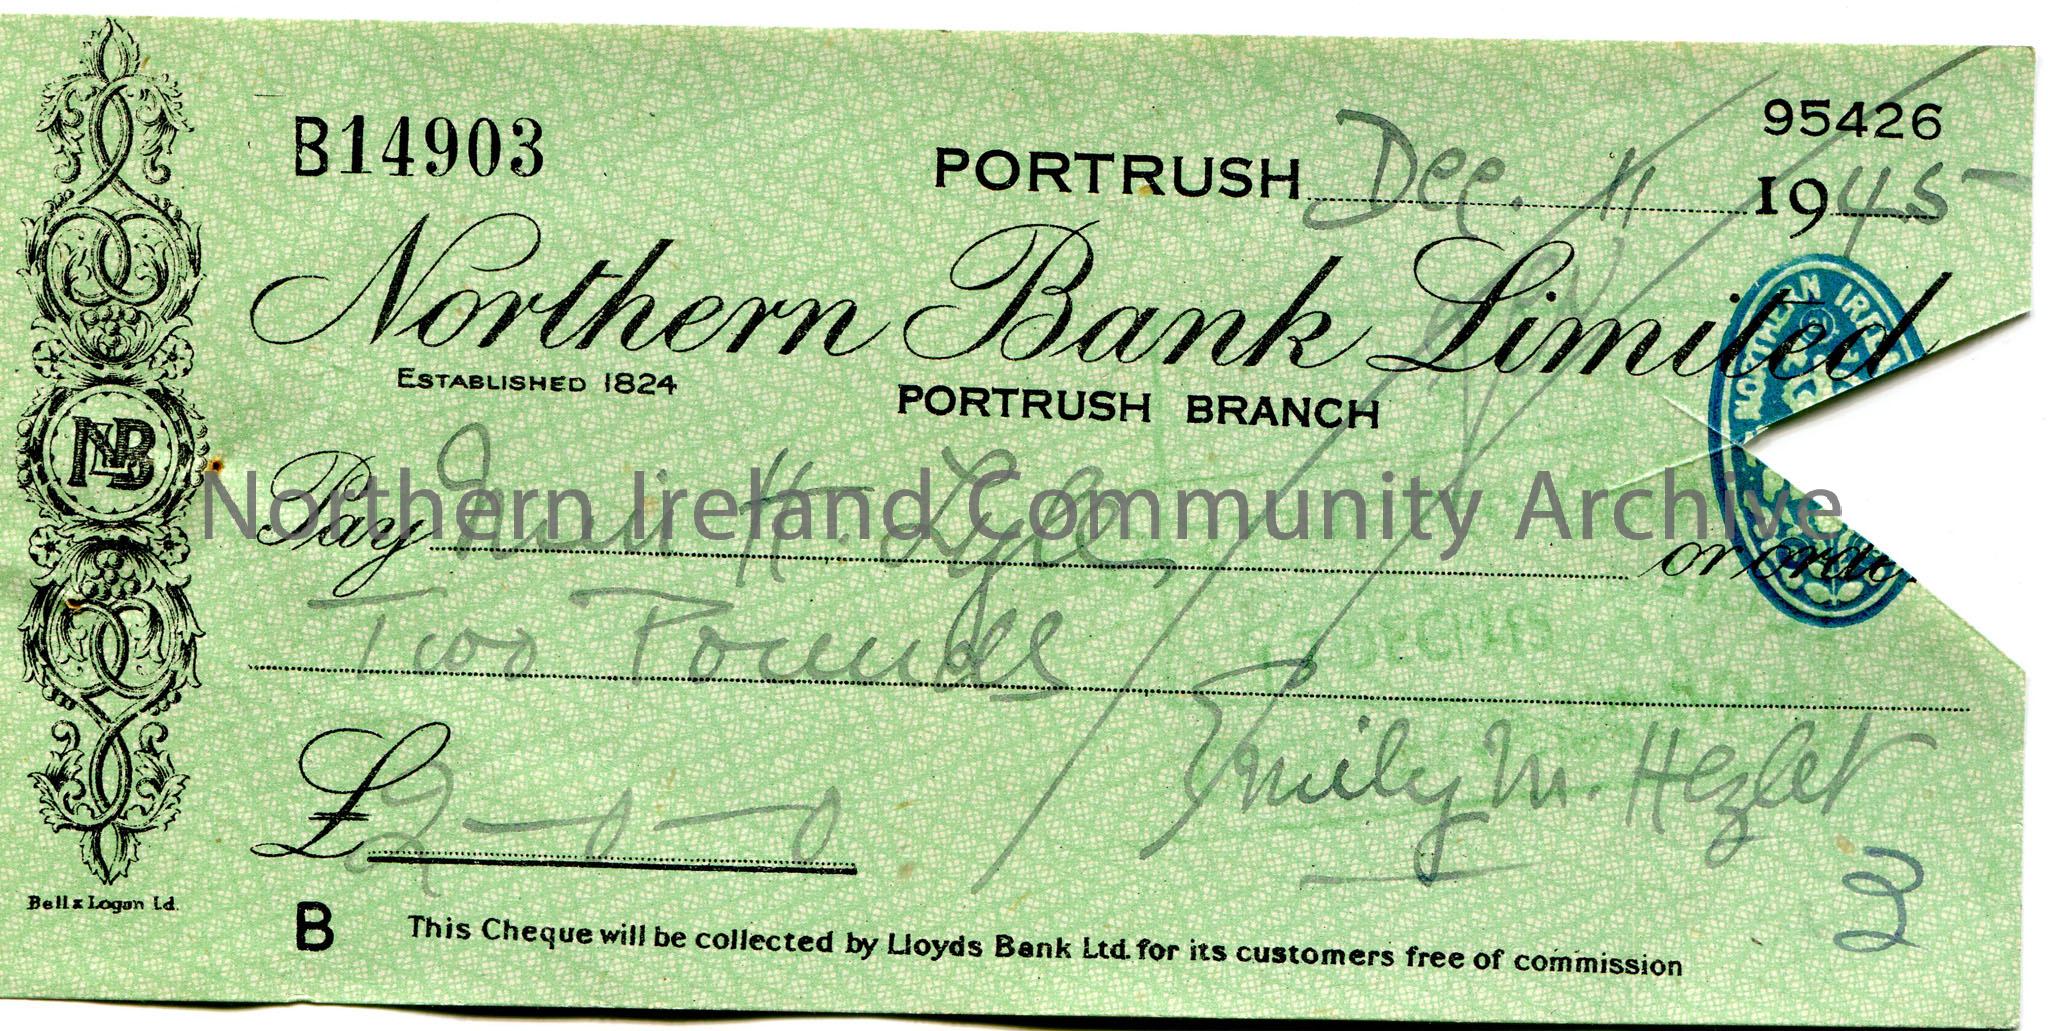 Handwritten Northern Bank Limited, Portrush branch cheque, no B14903. Payable to Miss H. Lyle from Emily M. Hezlet for £2.0.0. Dated 11th Decembe…